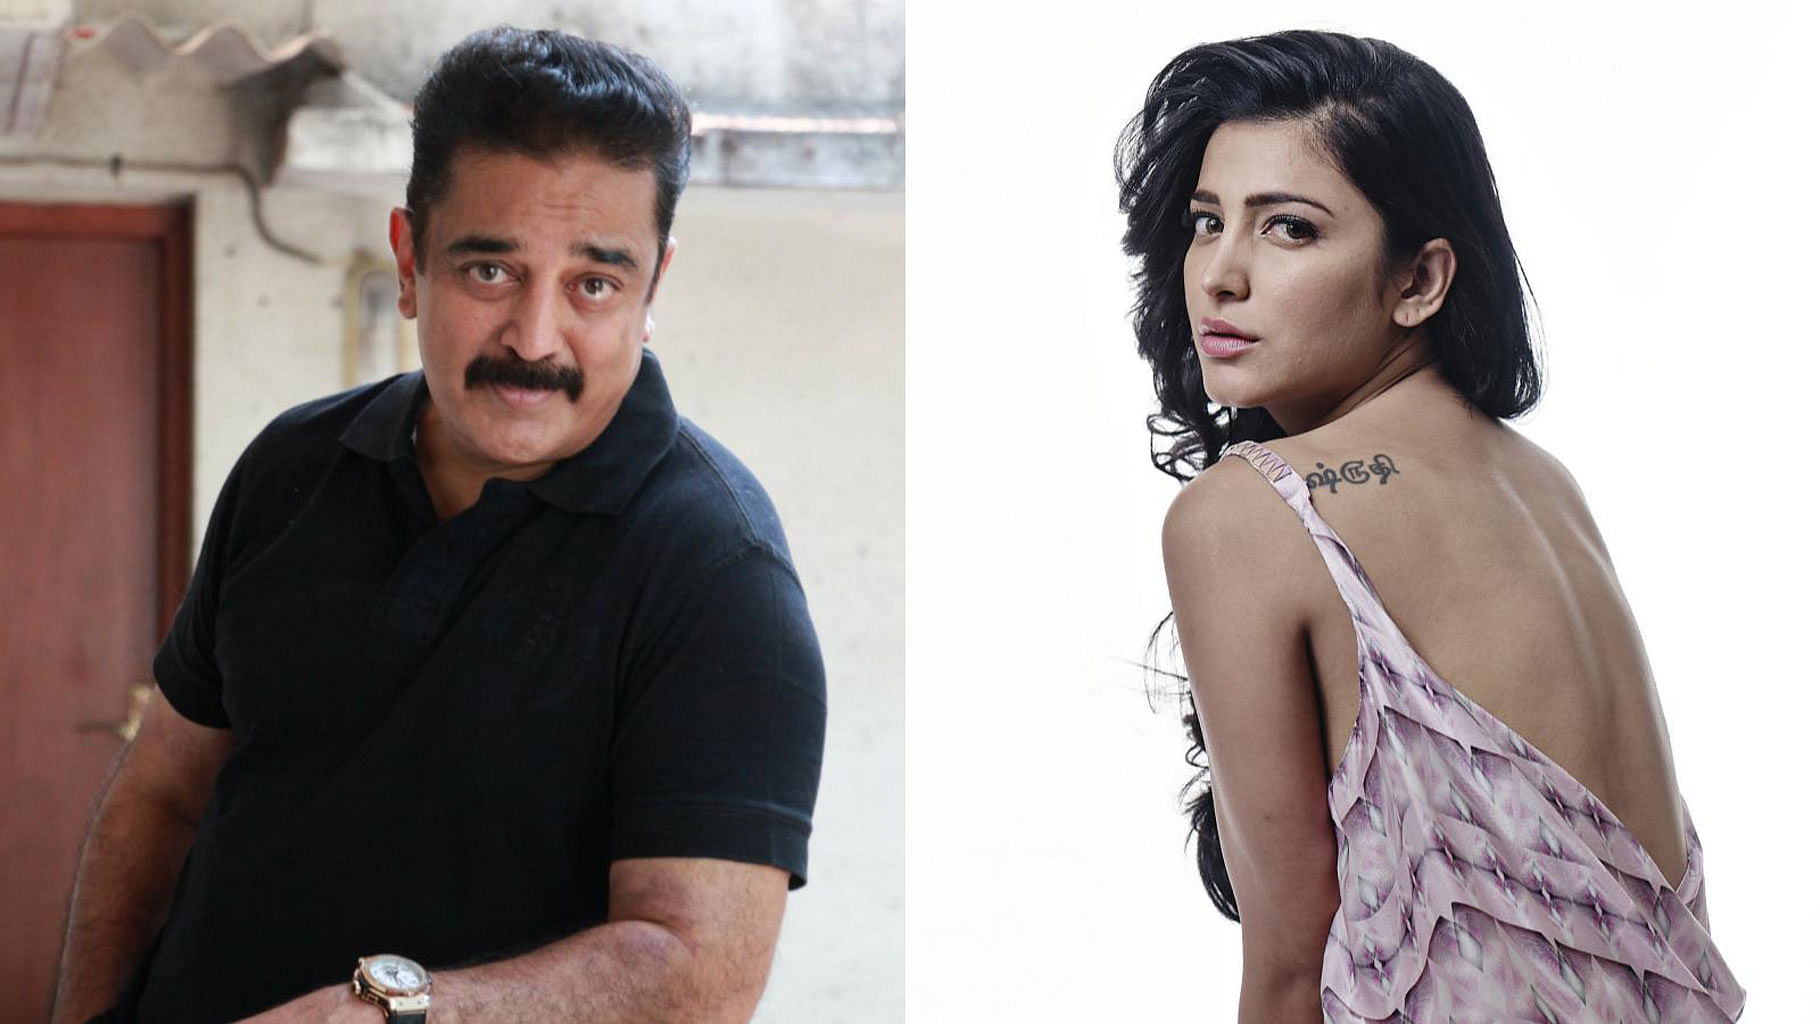 A yet-untitled Tamil project will feature Kamal and Shruti as father and daughter